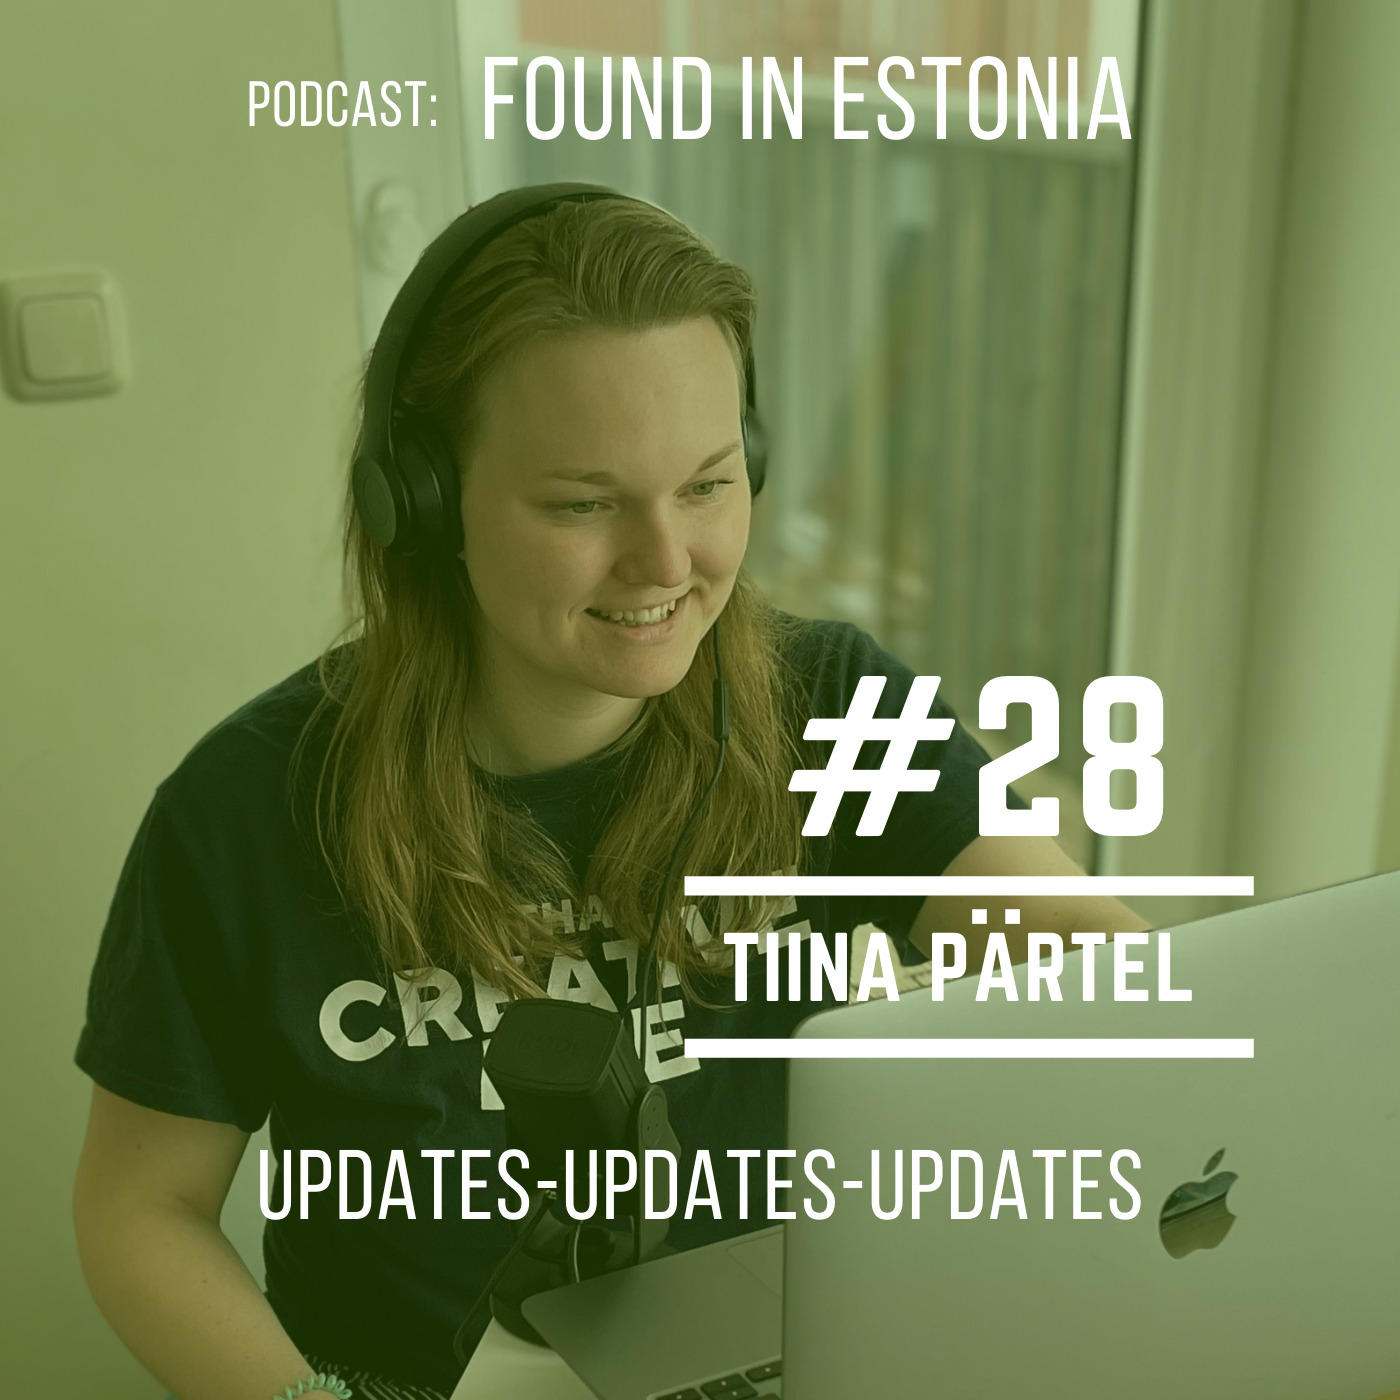 #28 Tiina - what's up with Found in Estonia podcast?